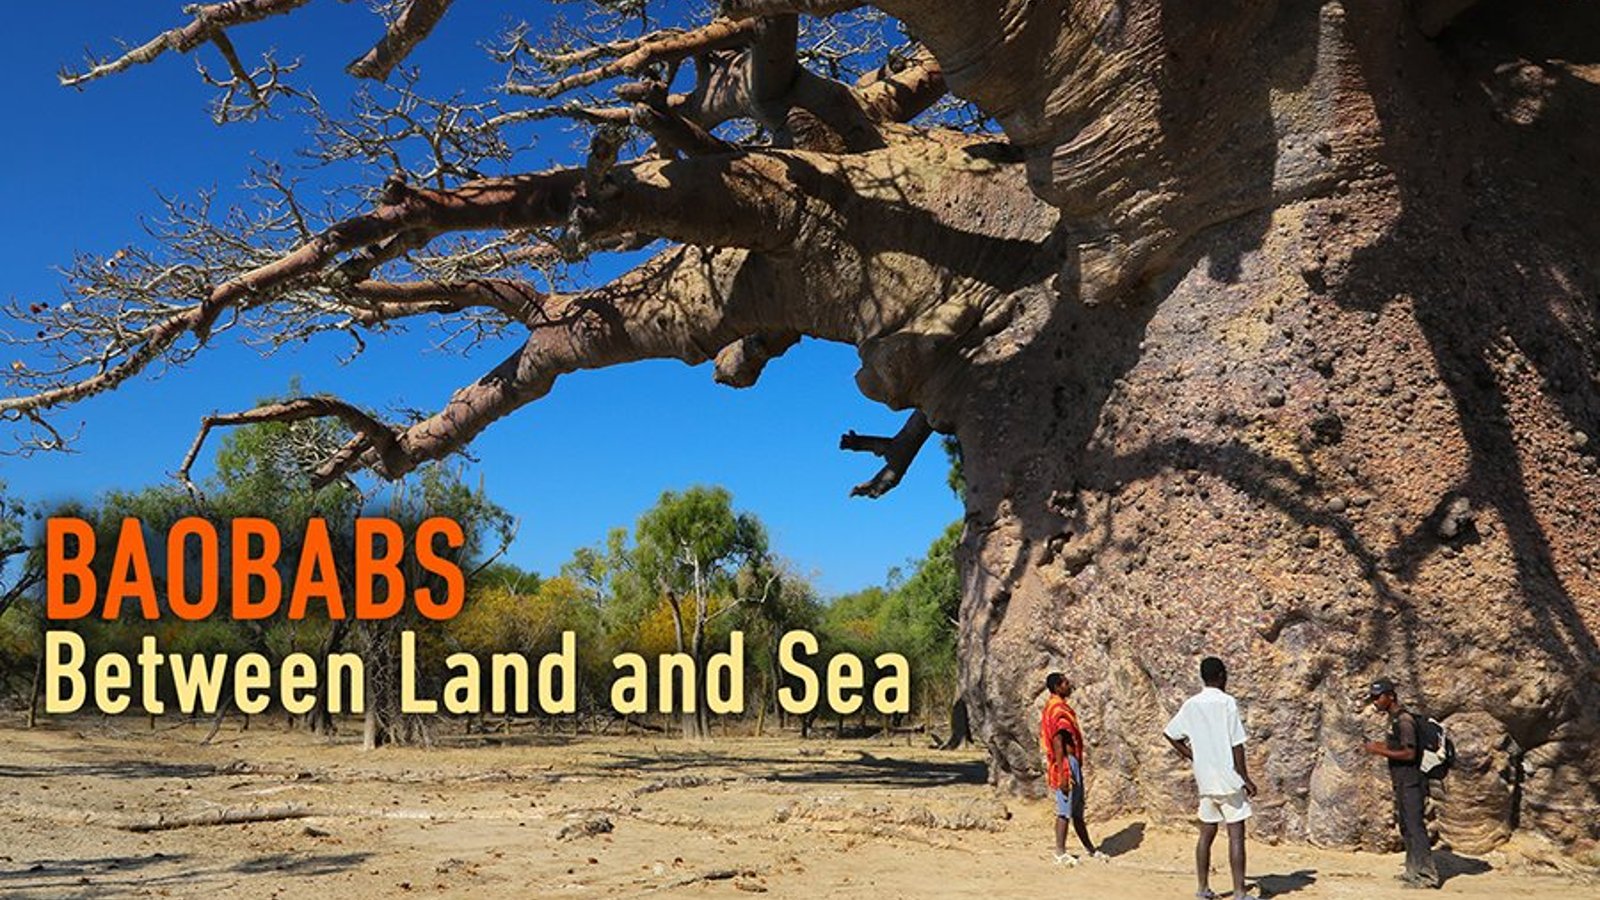 Baobabs - Between Land and Sea